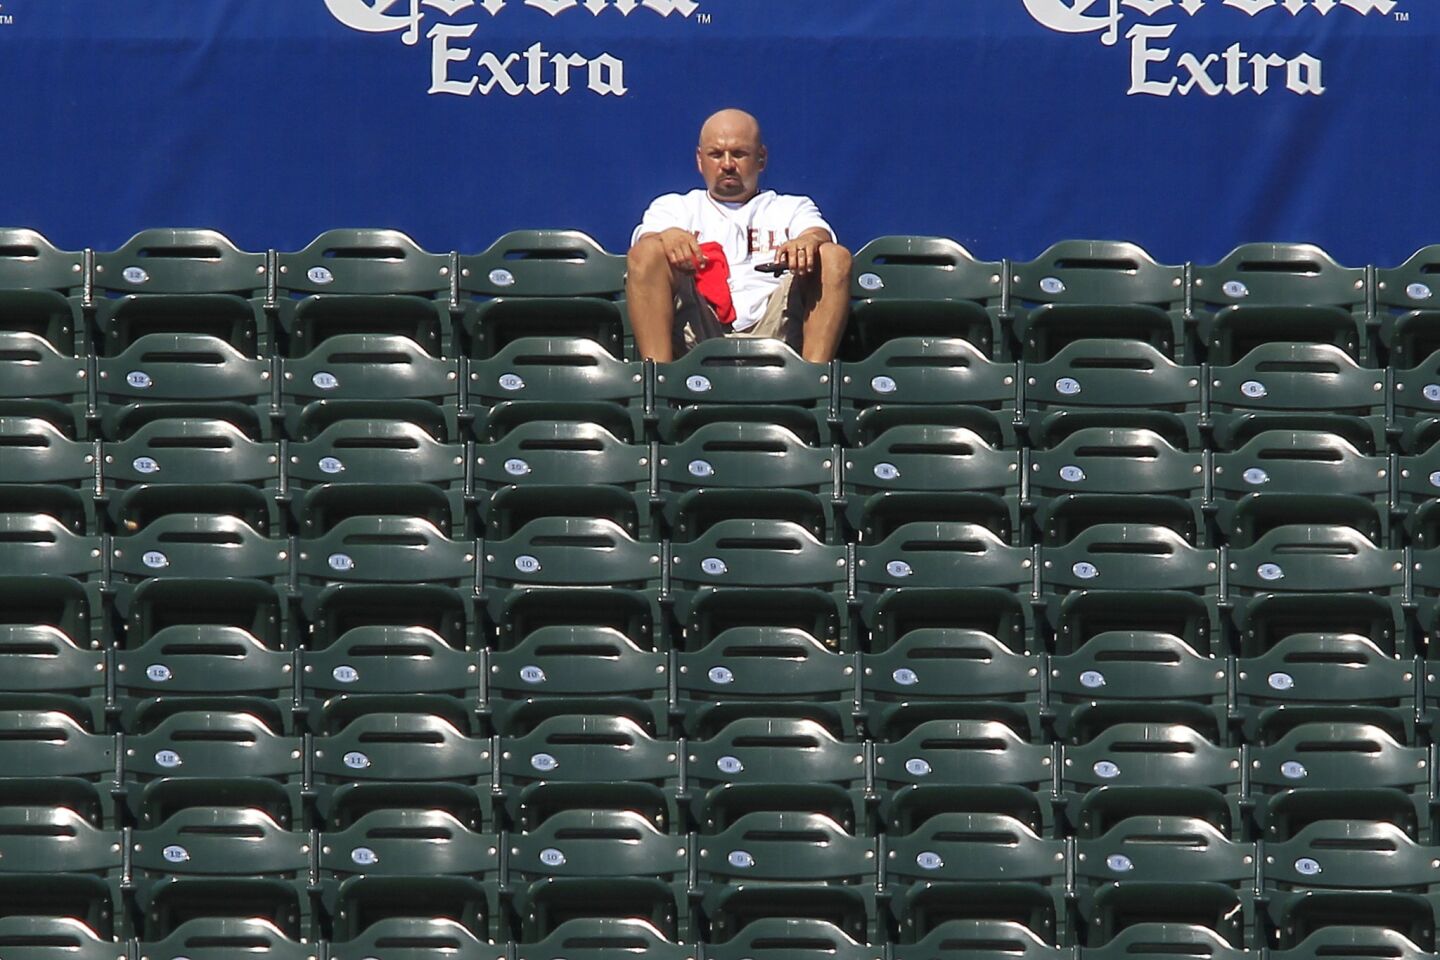 A man has a large section of the left field bleachers to himself as the heat kept many away from Angels Stadium for the game against the Houston Astros on Sunday.